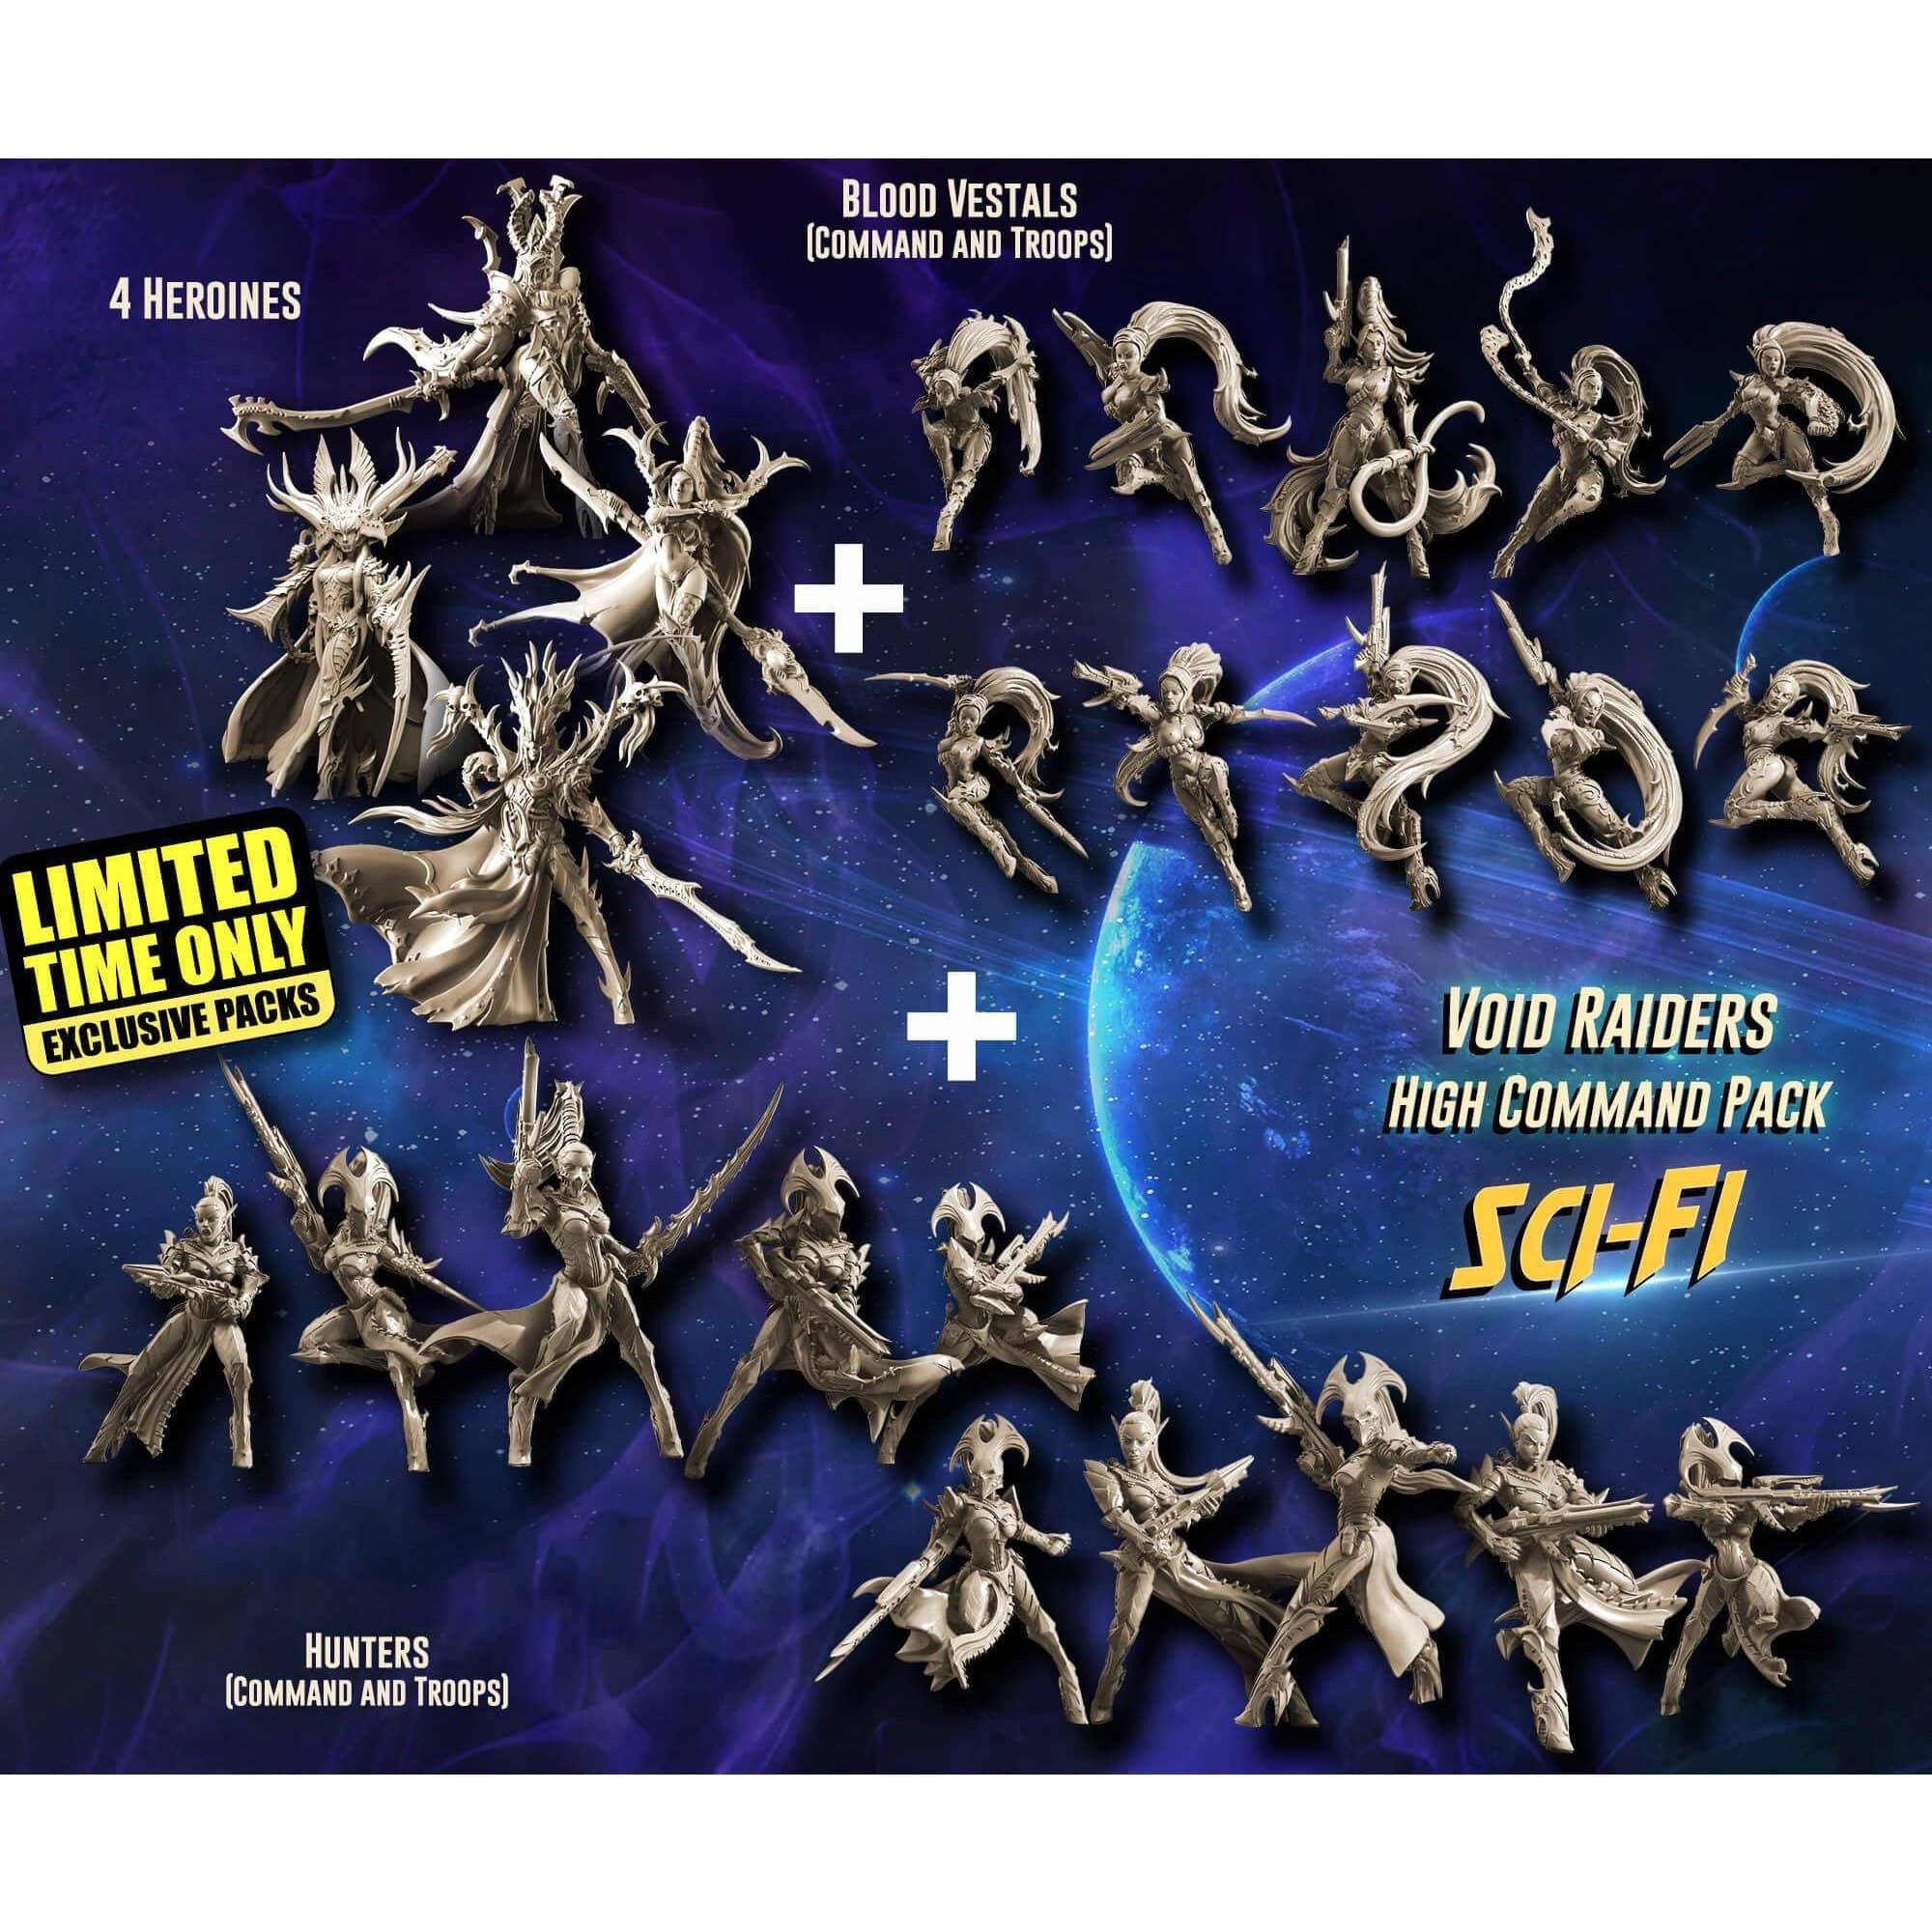 EXCLUSIEVE VOID RAIDERS High Command Pack (VE - SF)